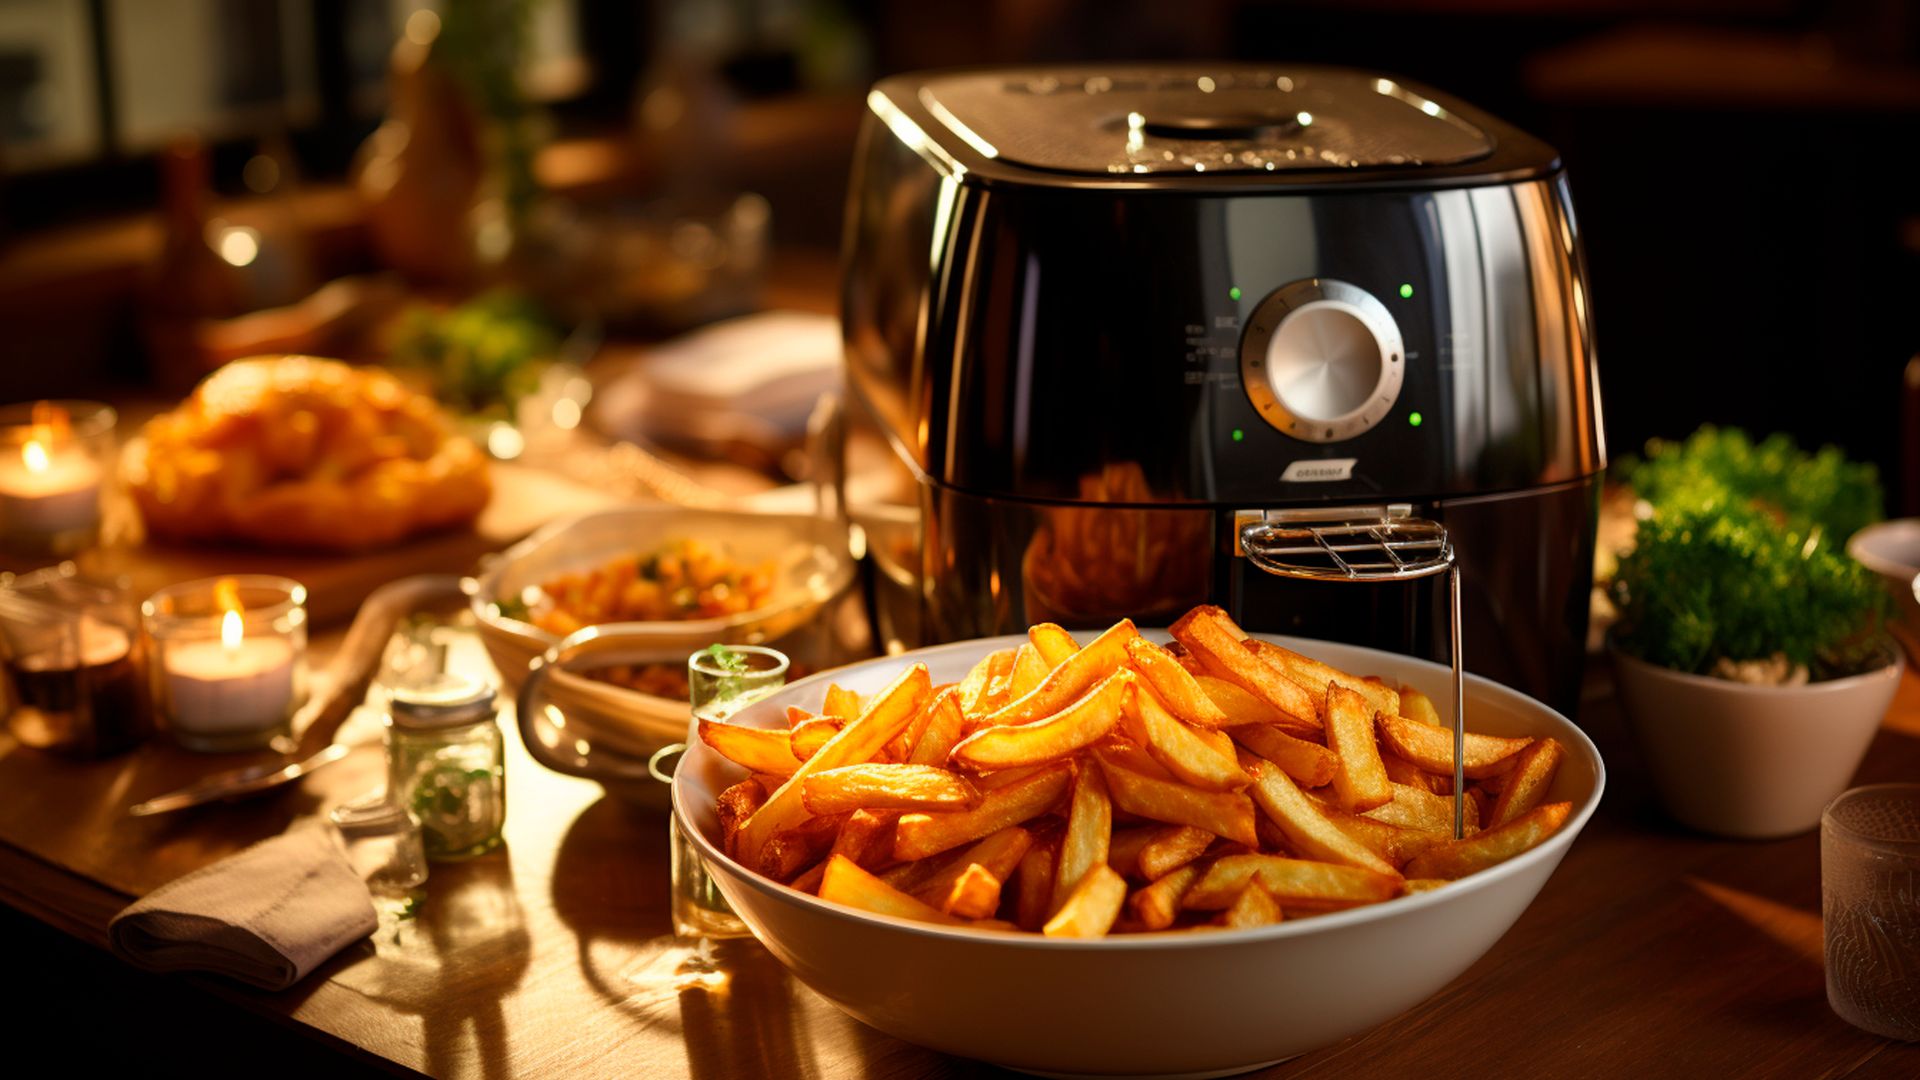 How Long to Cook Frozen French Fries in Air Fryer